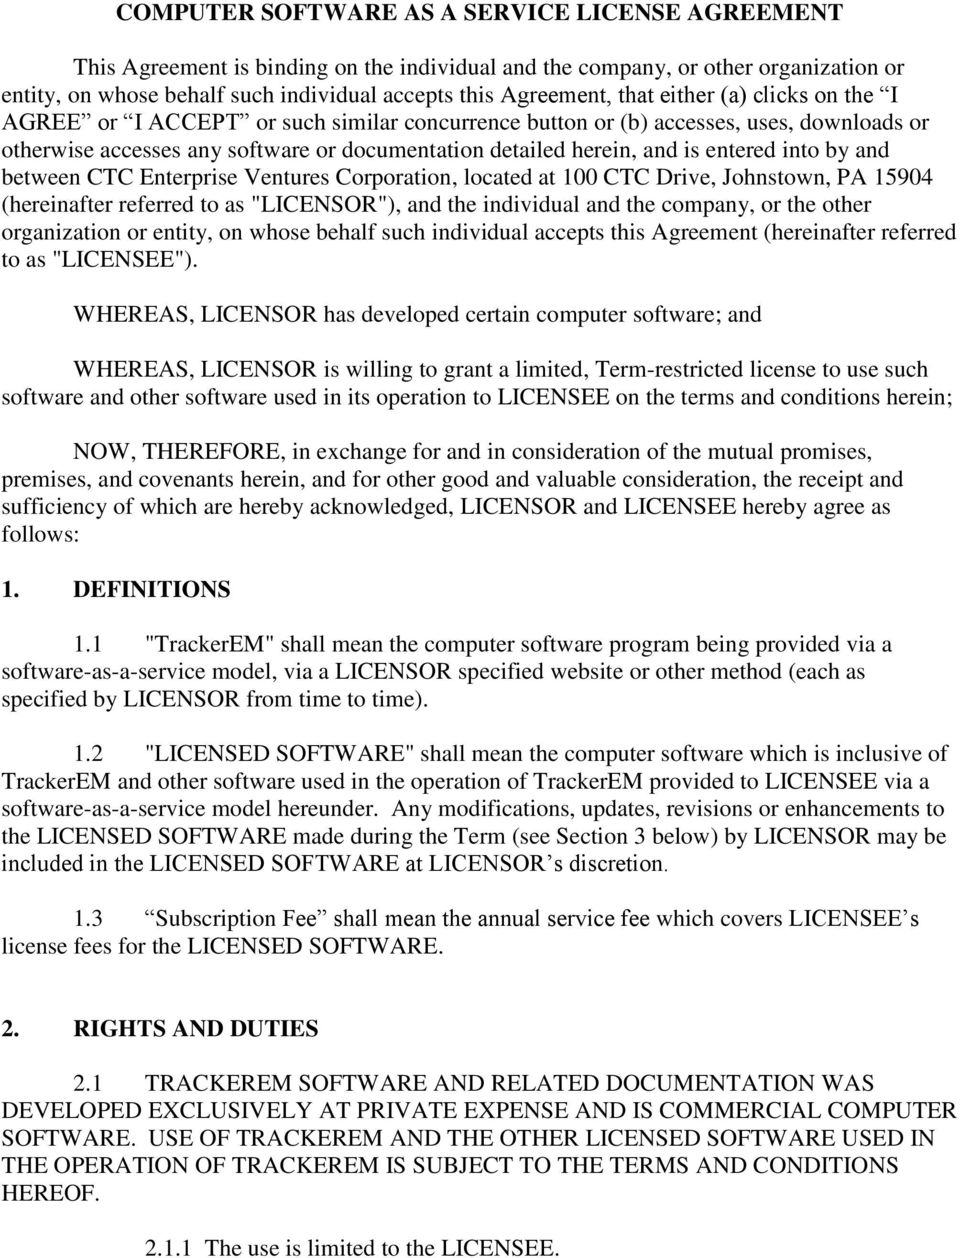 entered into by and between CTC Enterprise Ventures Corporation, located at 100 CTC Drive, Johnstown, PA 15904 (hereinafter referred to as "LICENSOR"), and the individual and the company, or the